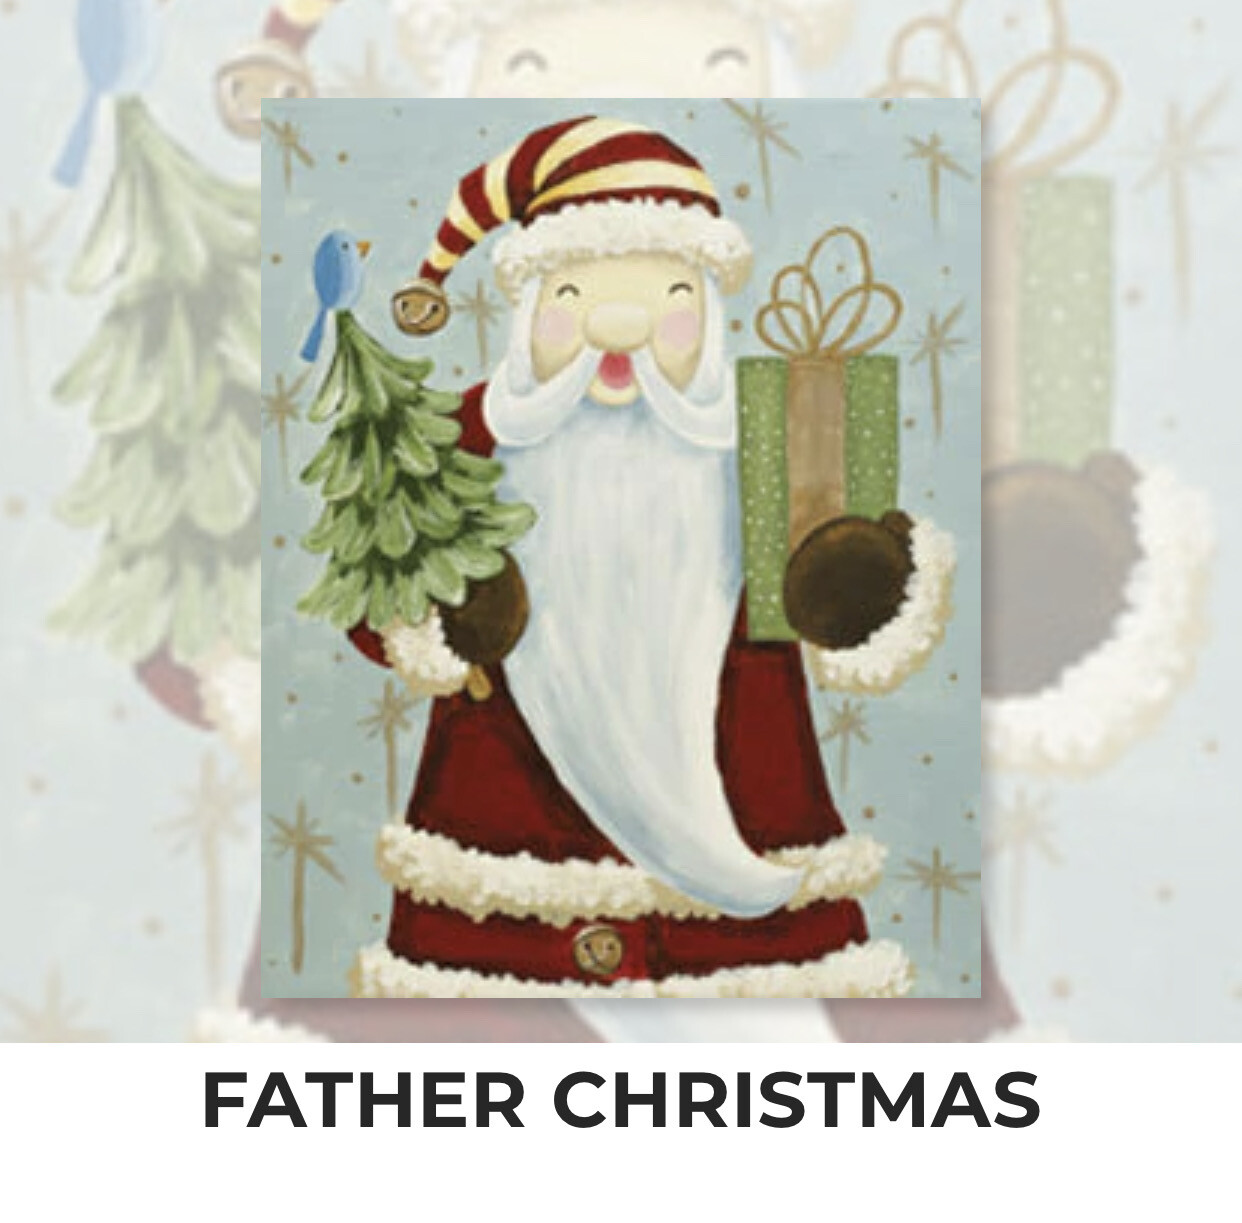 Father Christmas ADULT Acrylic Paint On Canvas DIY Art Kit - 3 Week Special Order